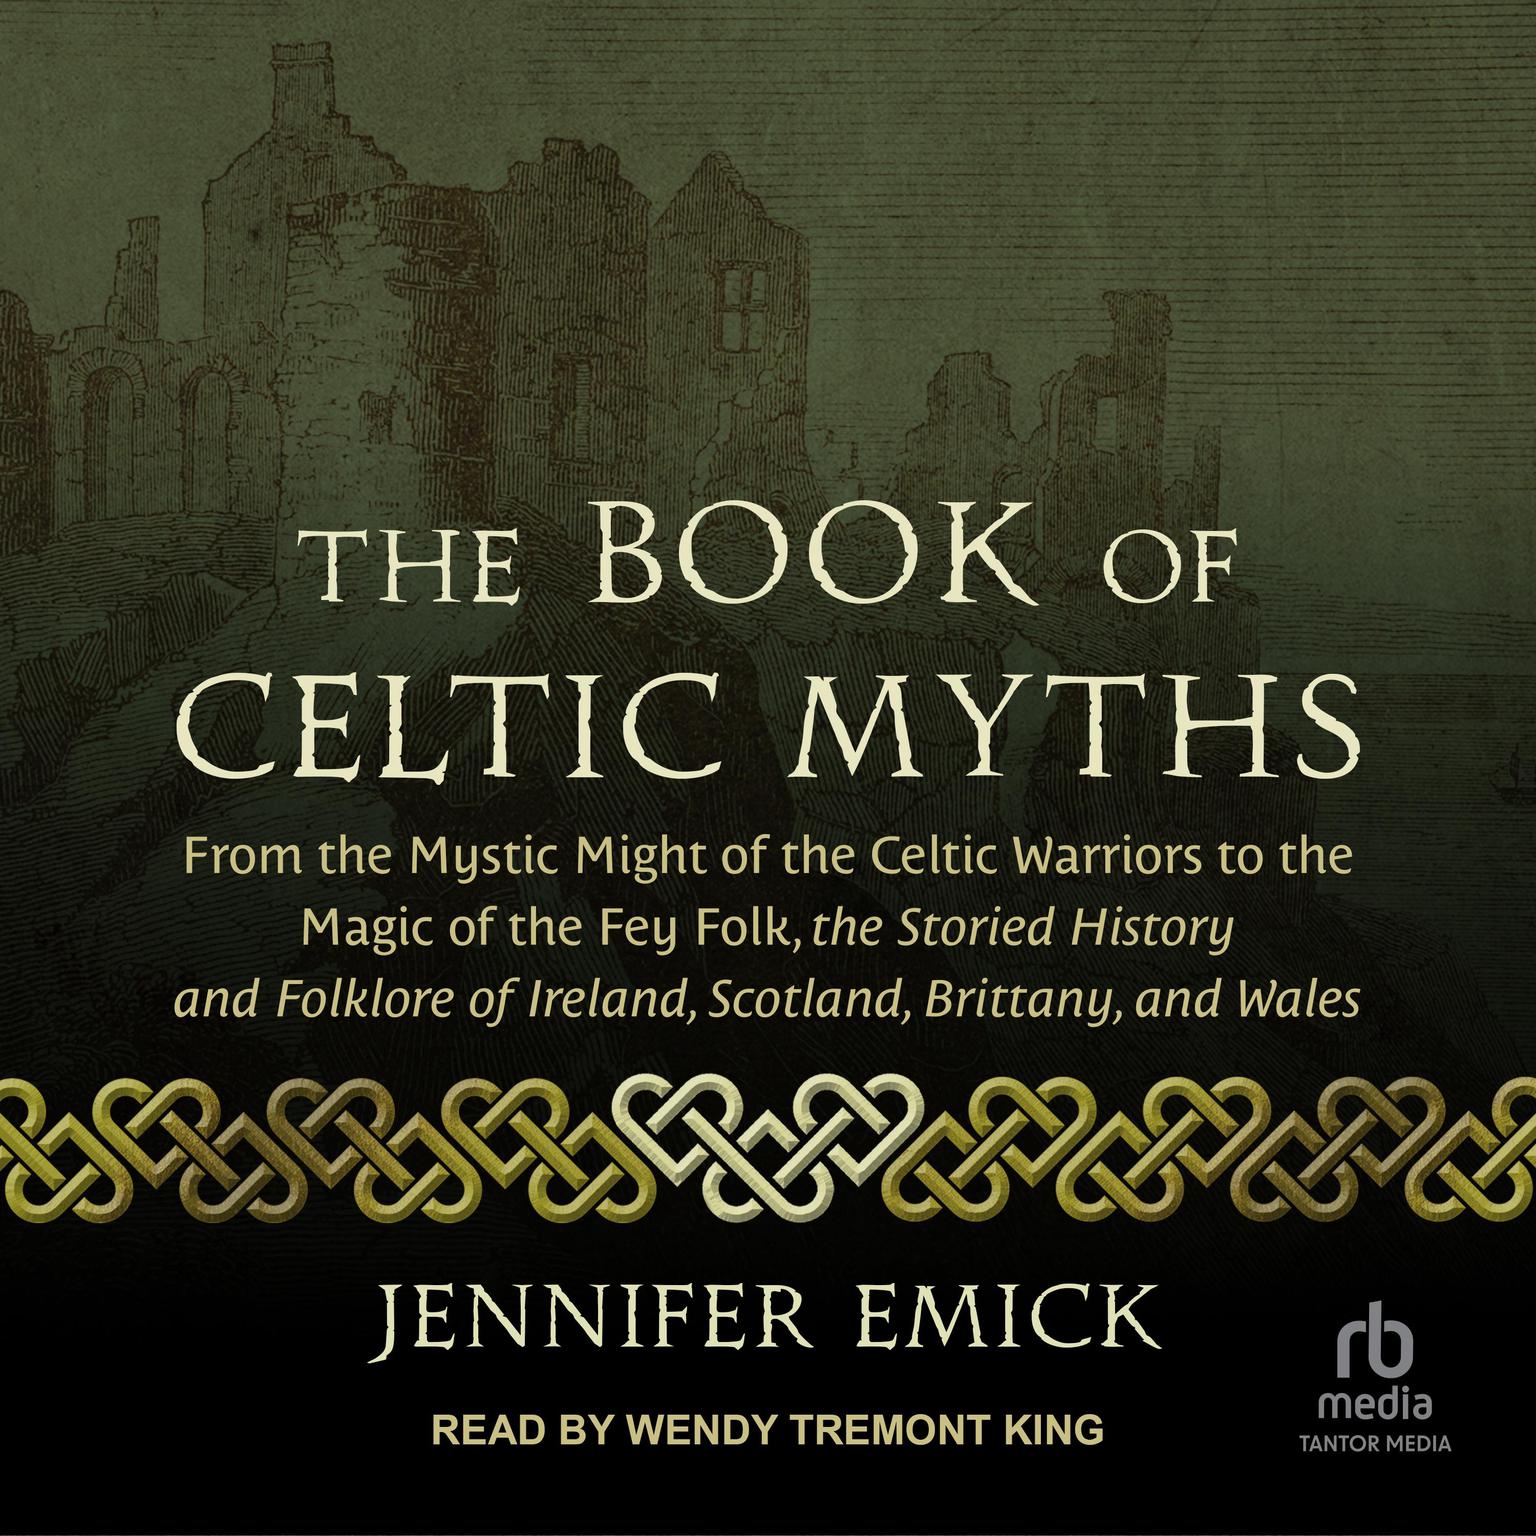 The Book of Celtic Myths: From the Mystic Might of the Celtic Warriors to the Magic of the Fey Folk, the Storied History and Folklore of Ireland, Scotland, Brittany, and Wales Audiobook, by Jennifer Emick